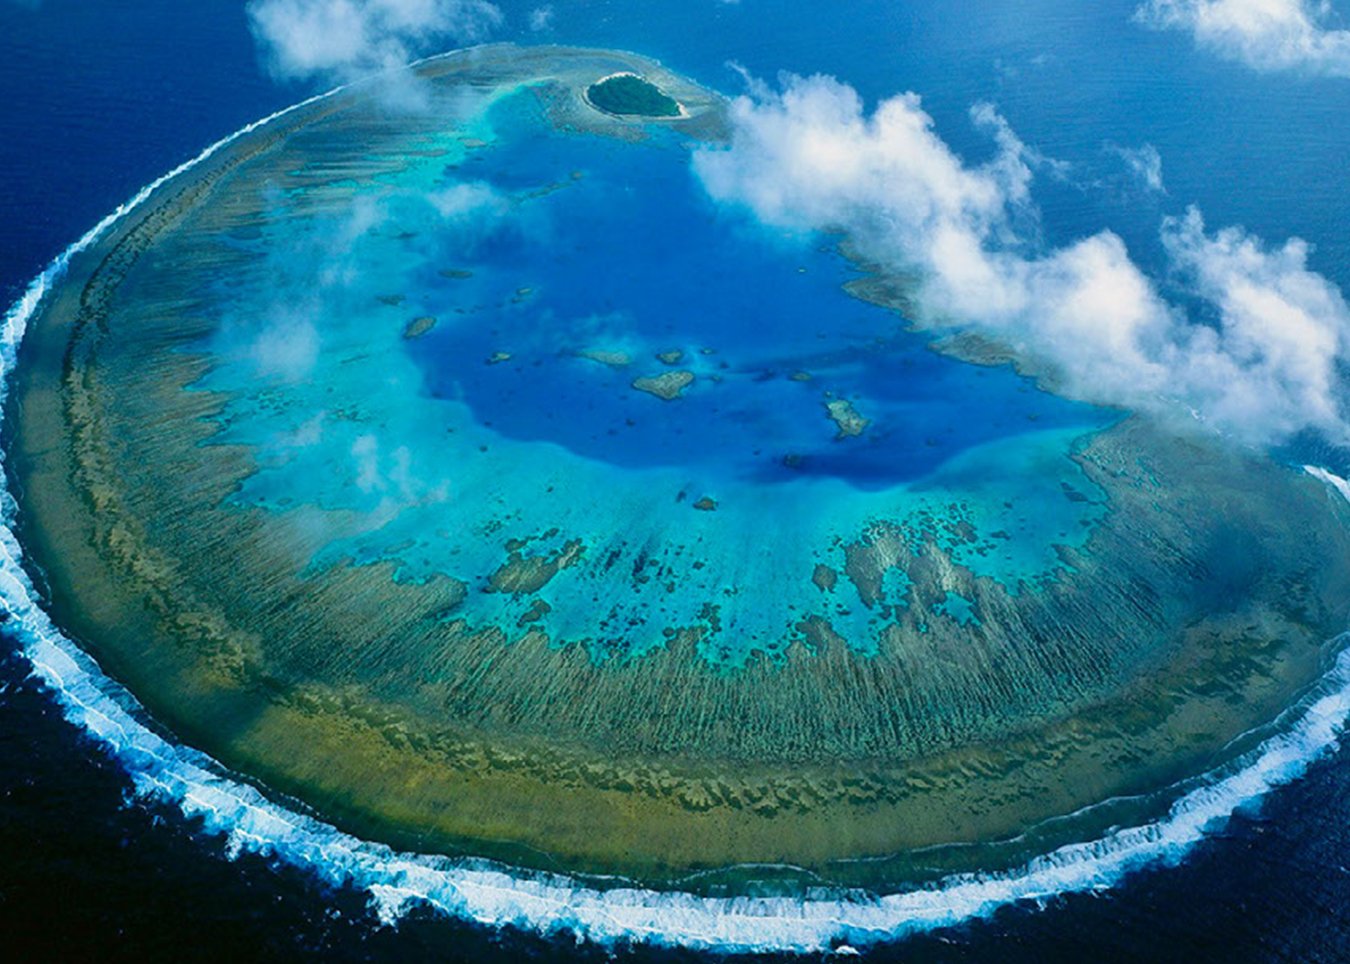 Southern Great Barrier Reef